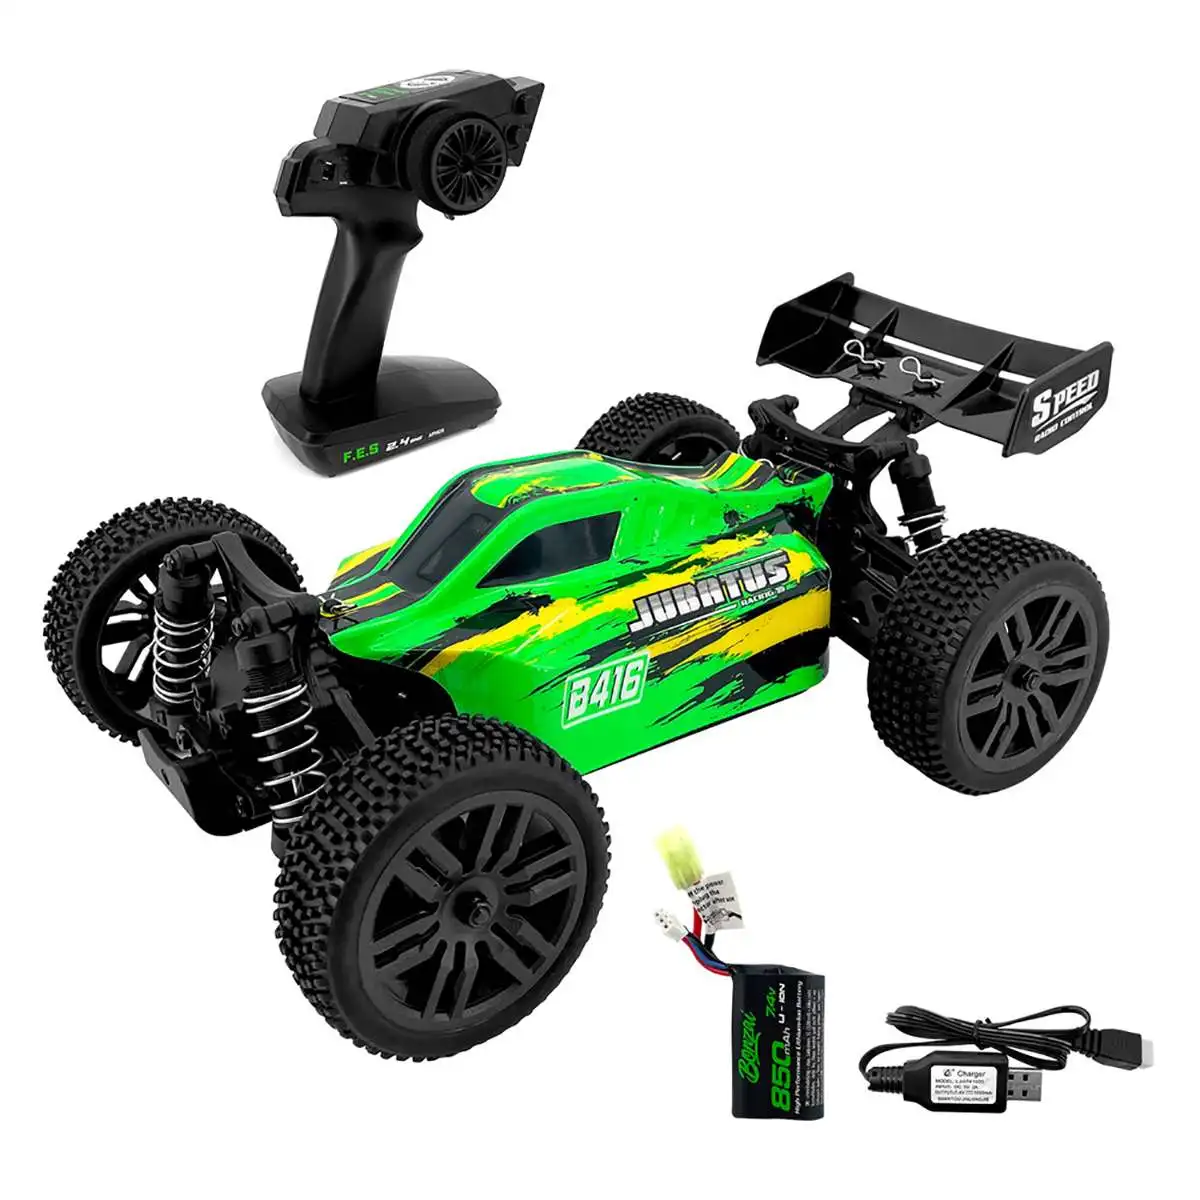 

1:14 Racing RC Car 2.4G 4WD 4CH High Speed 40km/h All Terrain Full Proportional RTR RC Vehicle Model Off Road Car For Teens EU